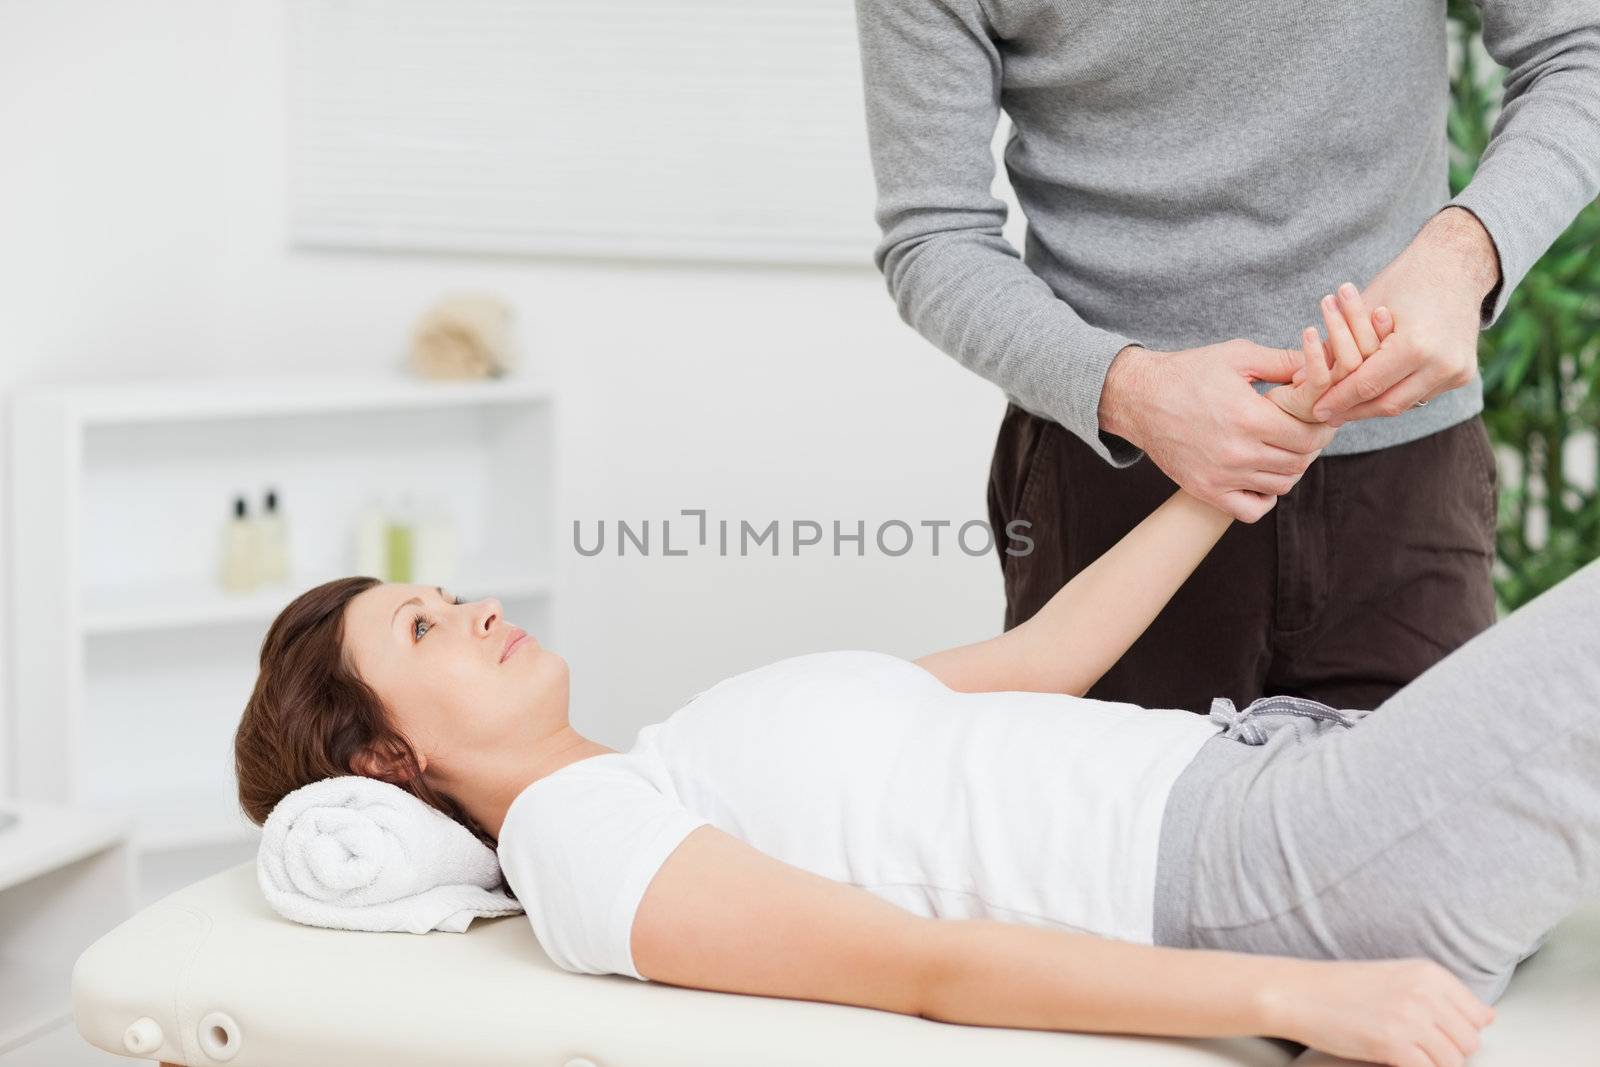 Physiotherapist massaging the hand of a woman in a physio room